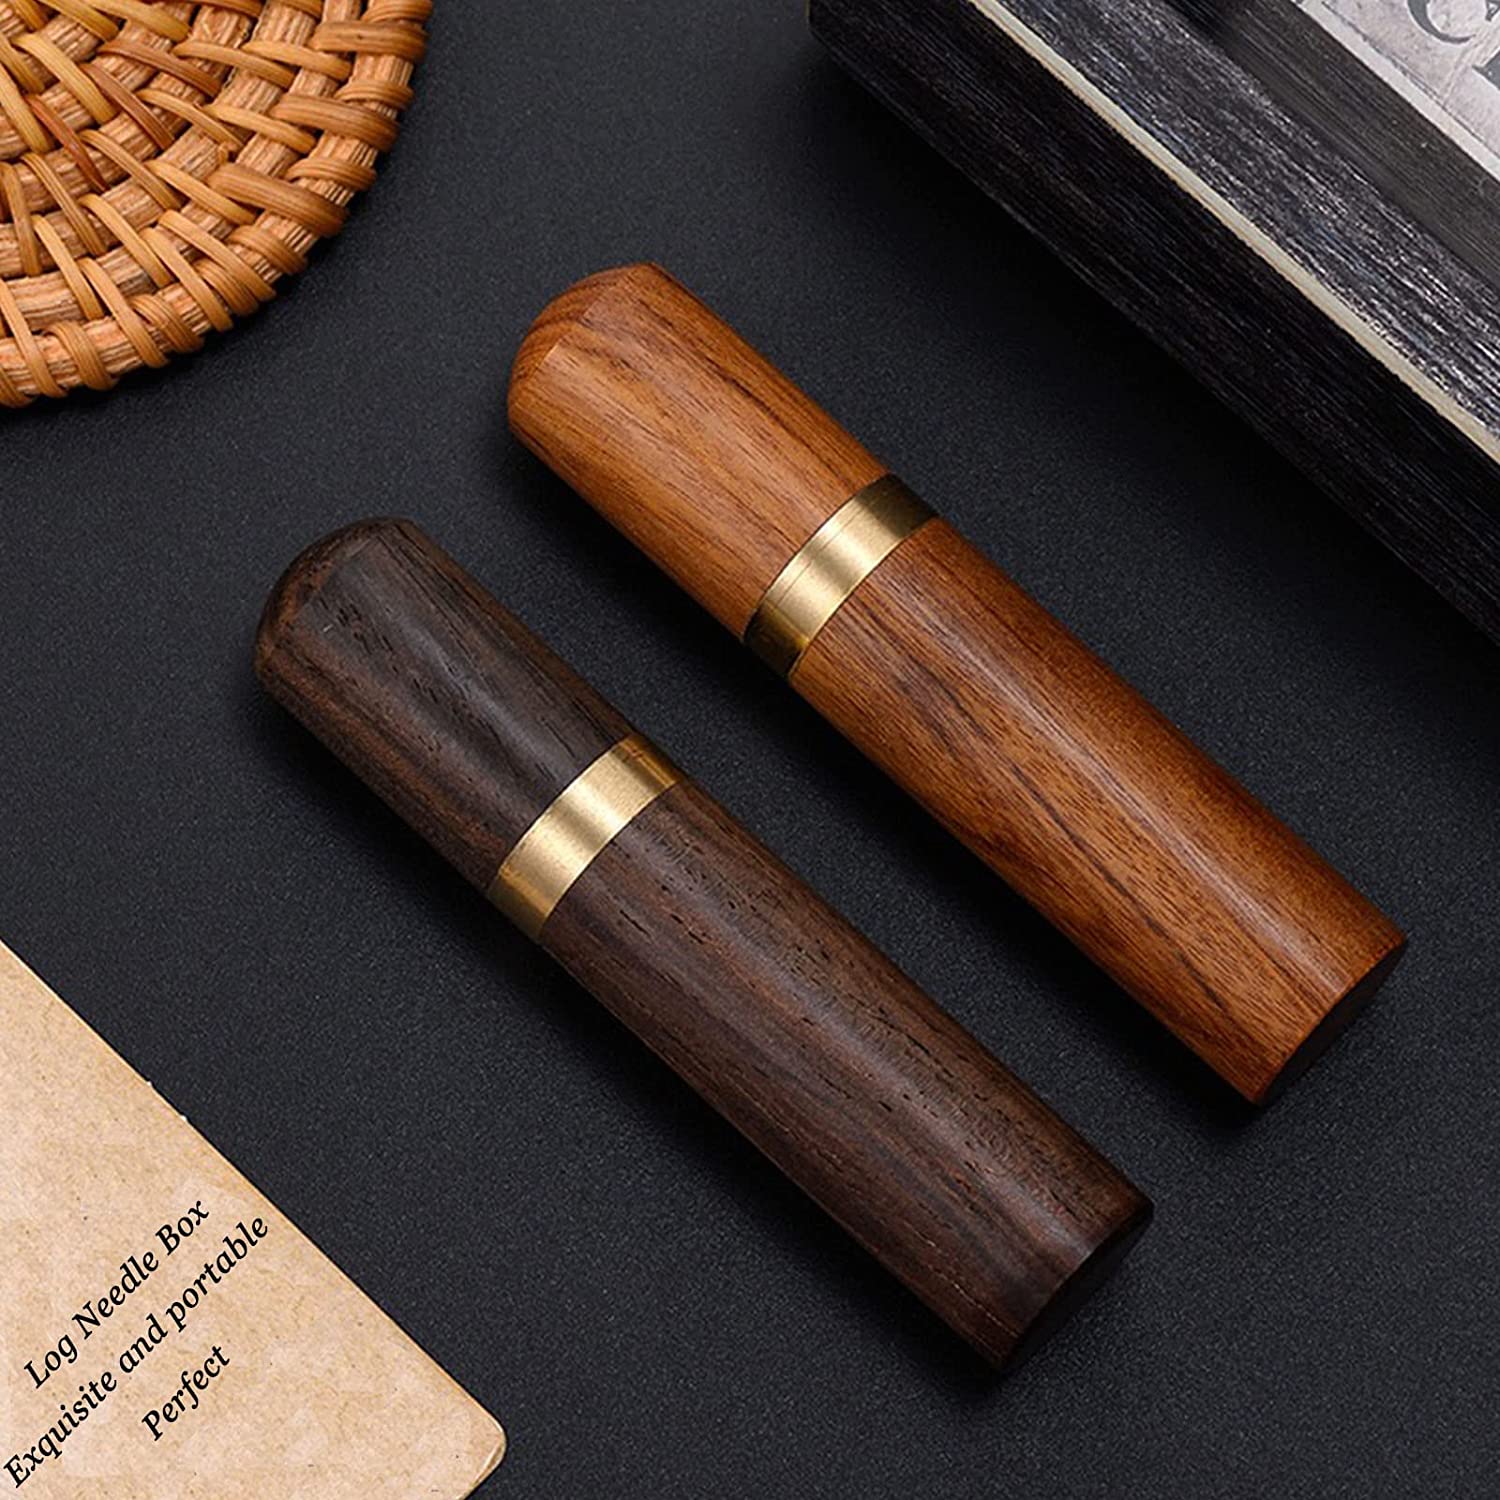 Rurah Portable Wooden Toothpick Holder Pocket Tooth Pick Holder Embroidery  Hand Sewing Needle Storage Case Container,Ebony